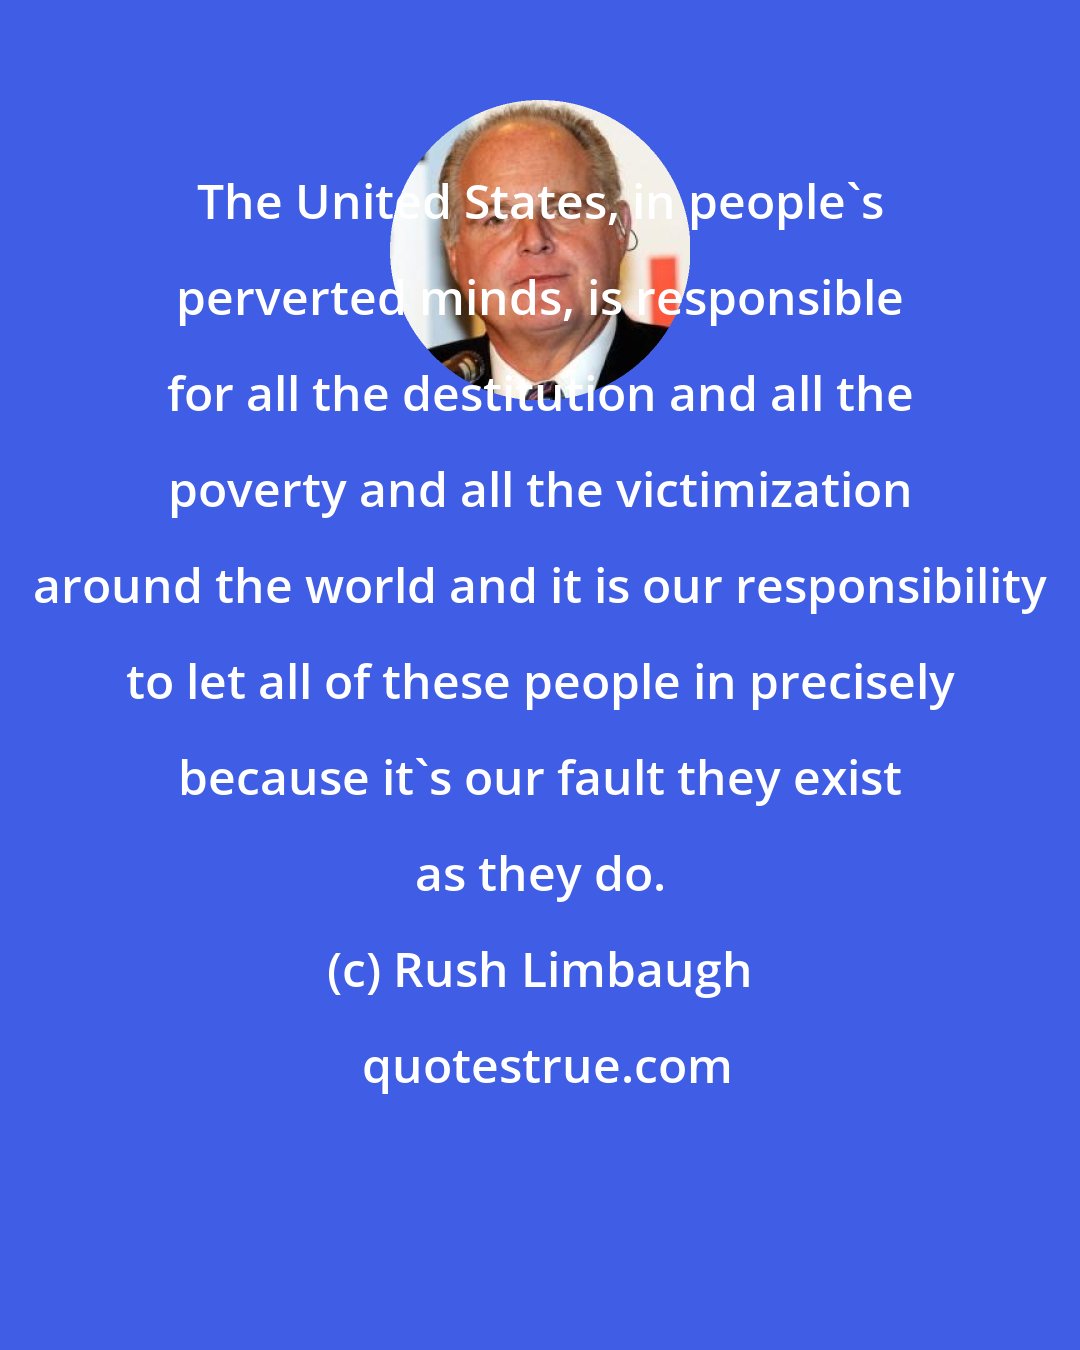 Rush Limbaugh: The United States, in people's perverted minds, is responsible for all the destitution and all the poverty and all the victimization around the world and it is our responsibility to let all of these people in precisely because it's our fault they exist as they do.